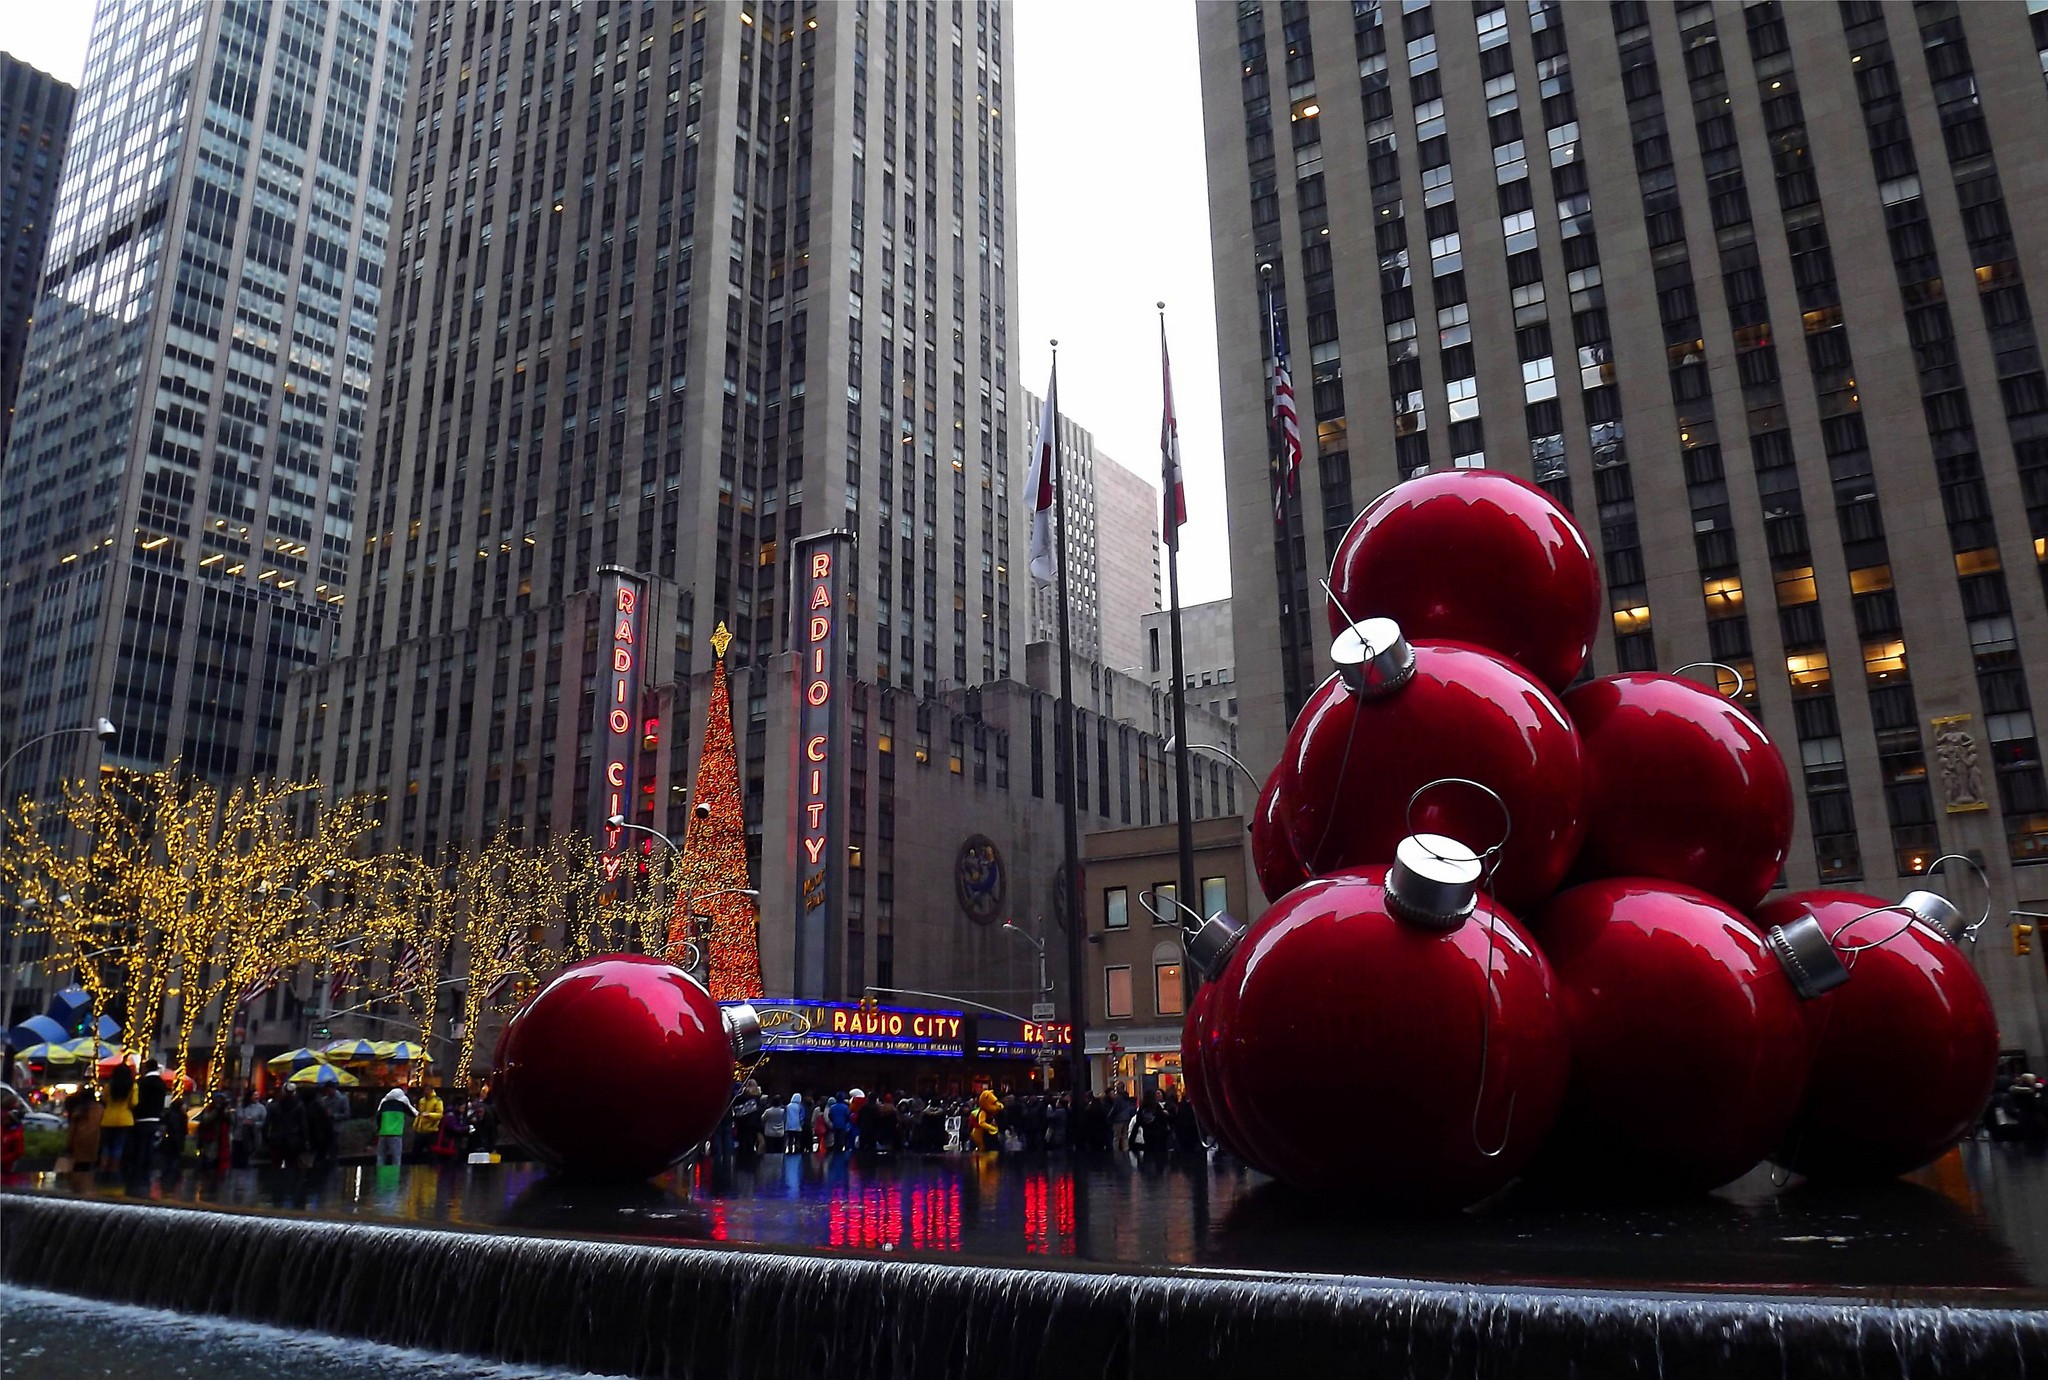 Natale a New York